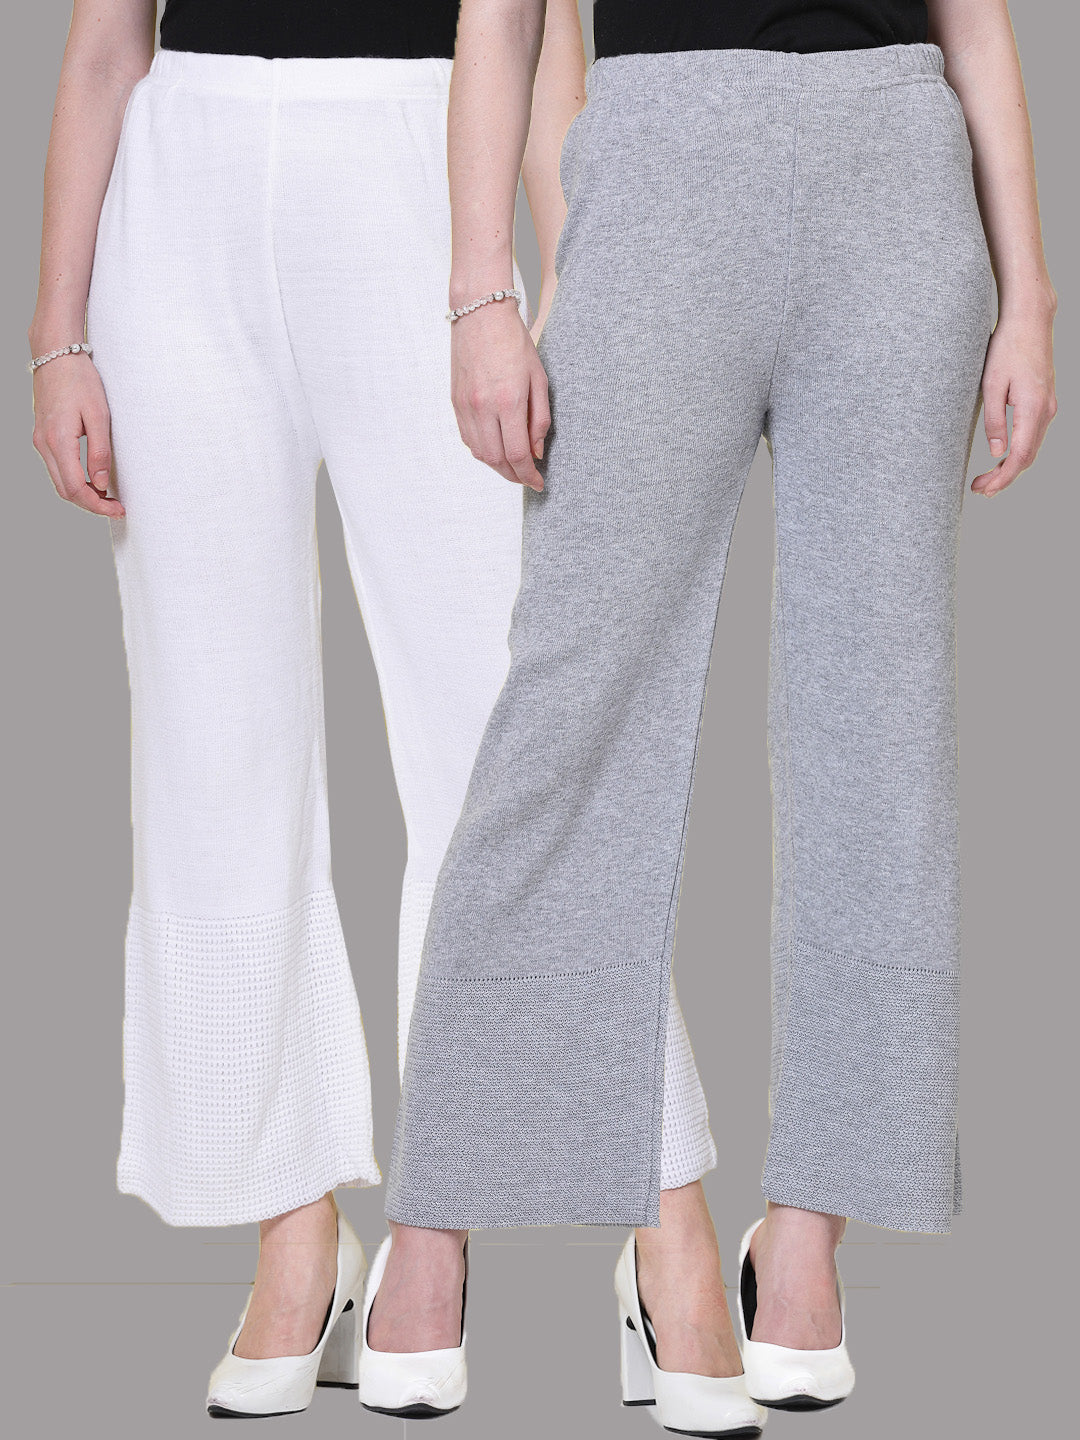 White & Light Grey Solid Woollen Palazzo (Pack of 2)